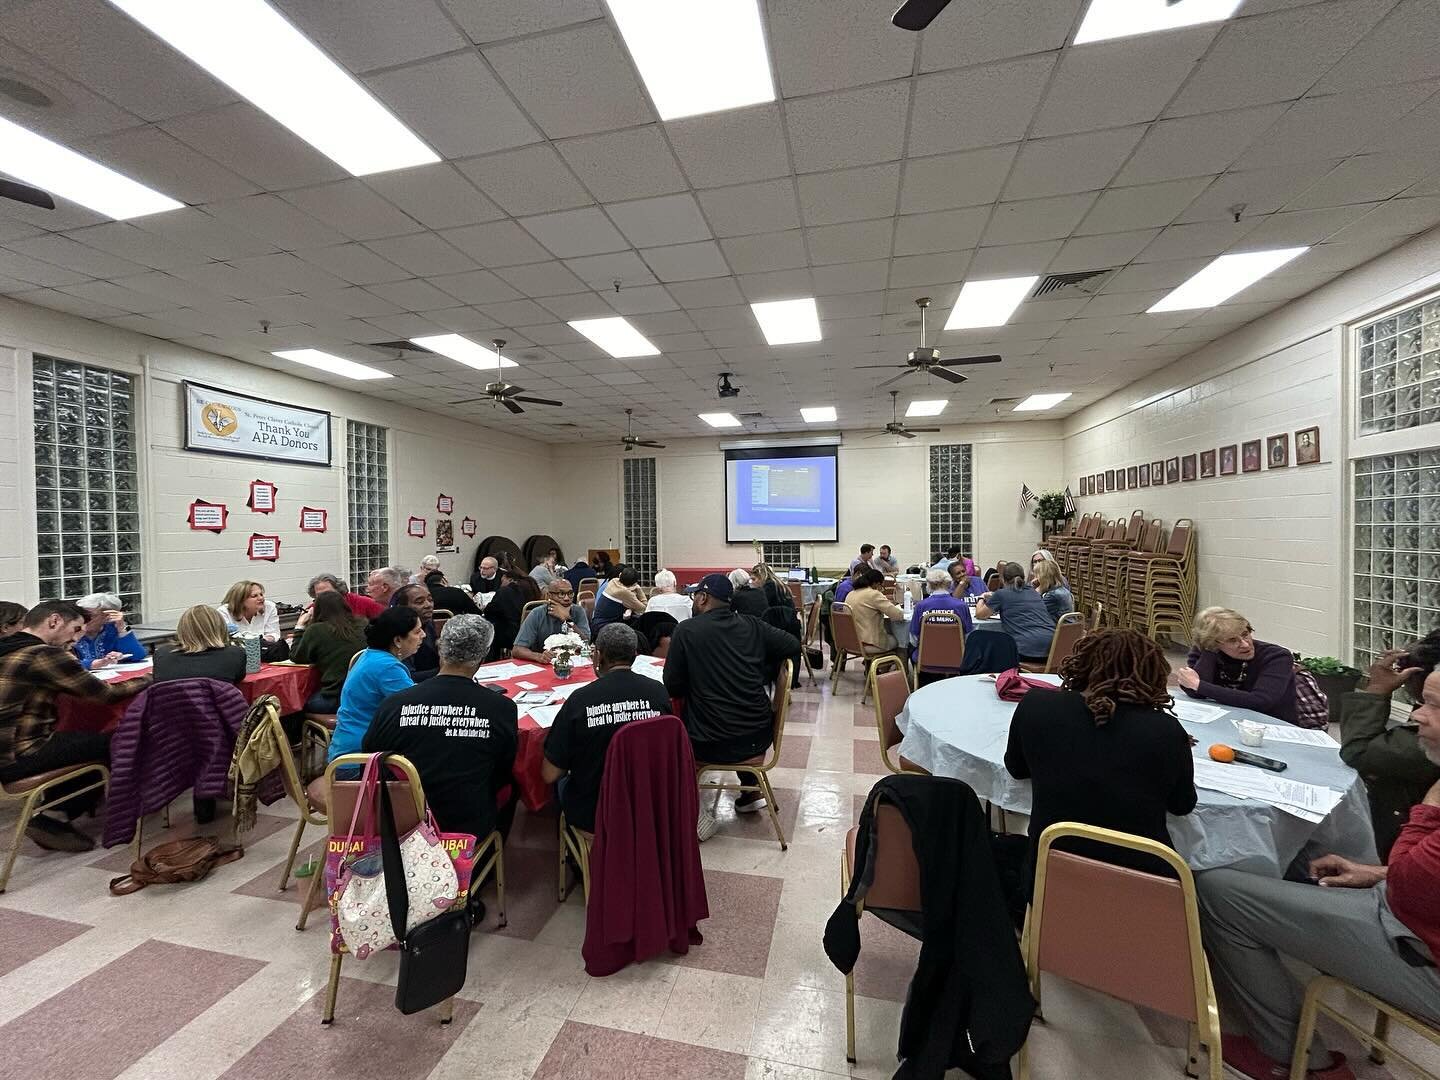 Leaders and clergy came together on Monday to prepare for an energizing and powerful Rally at Hyde Park United Methodist Church at 7 pm! Mark your calendars! We look forward to seeing you there.